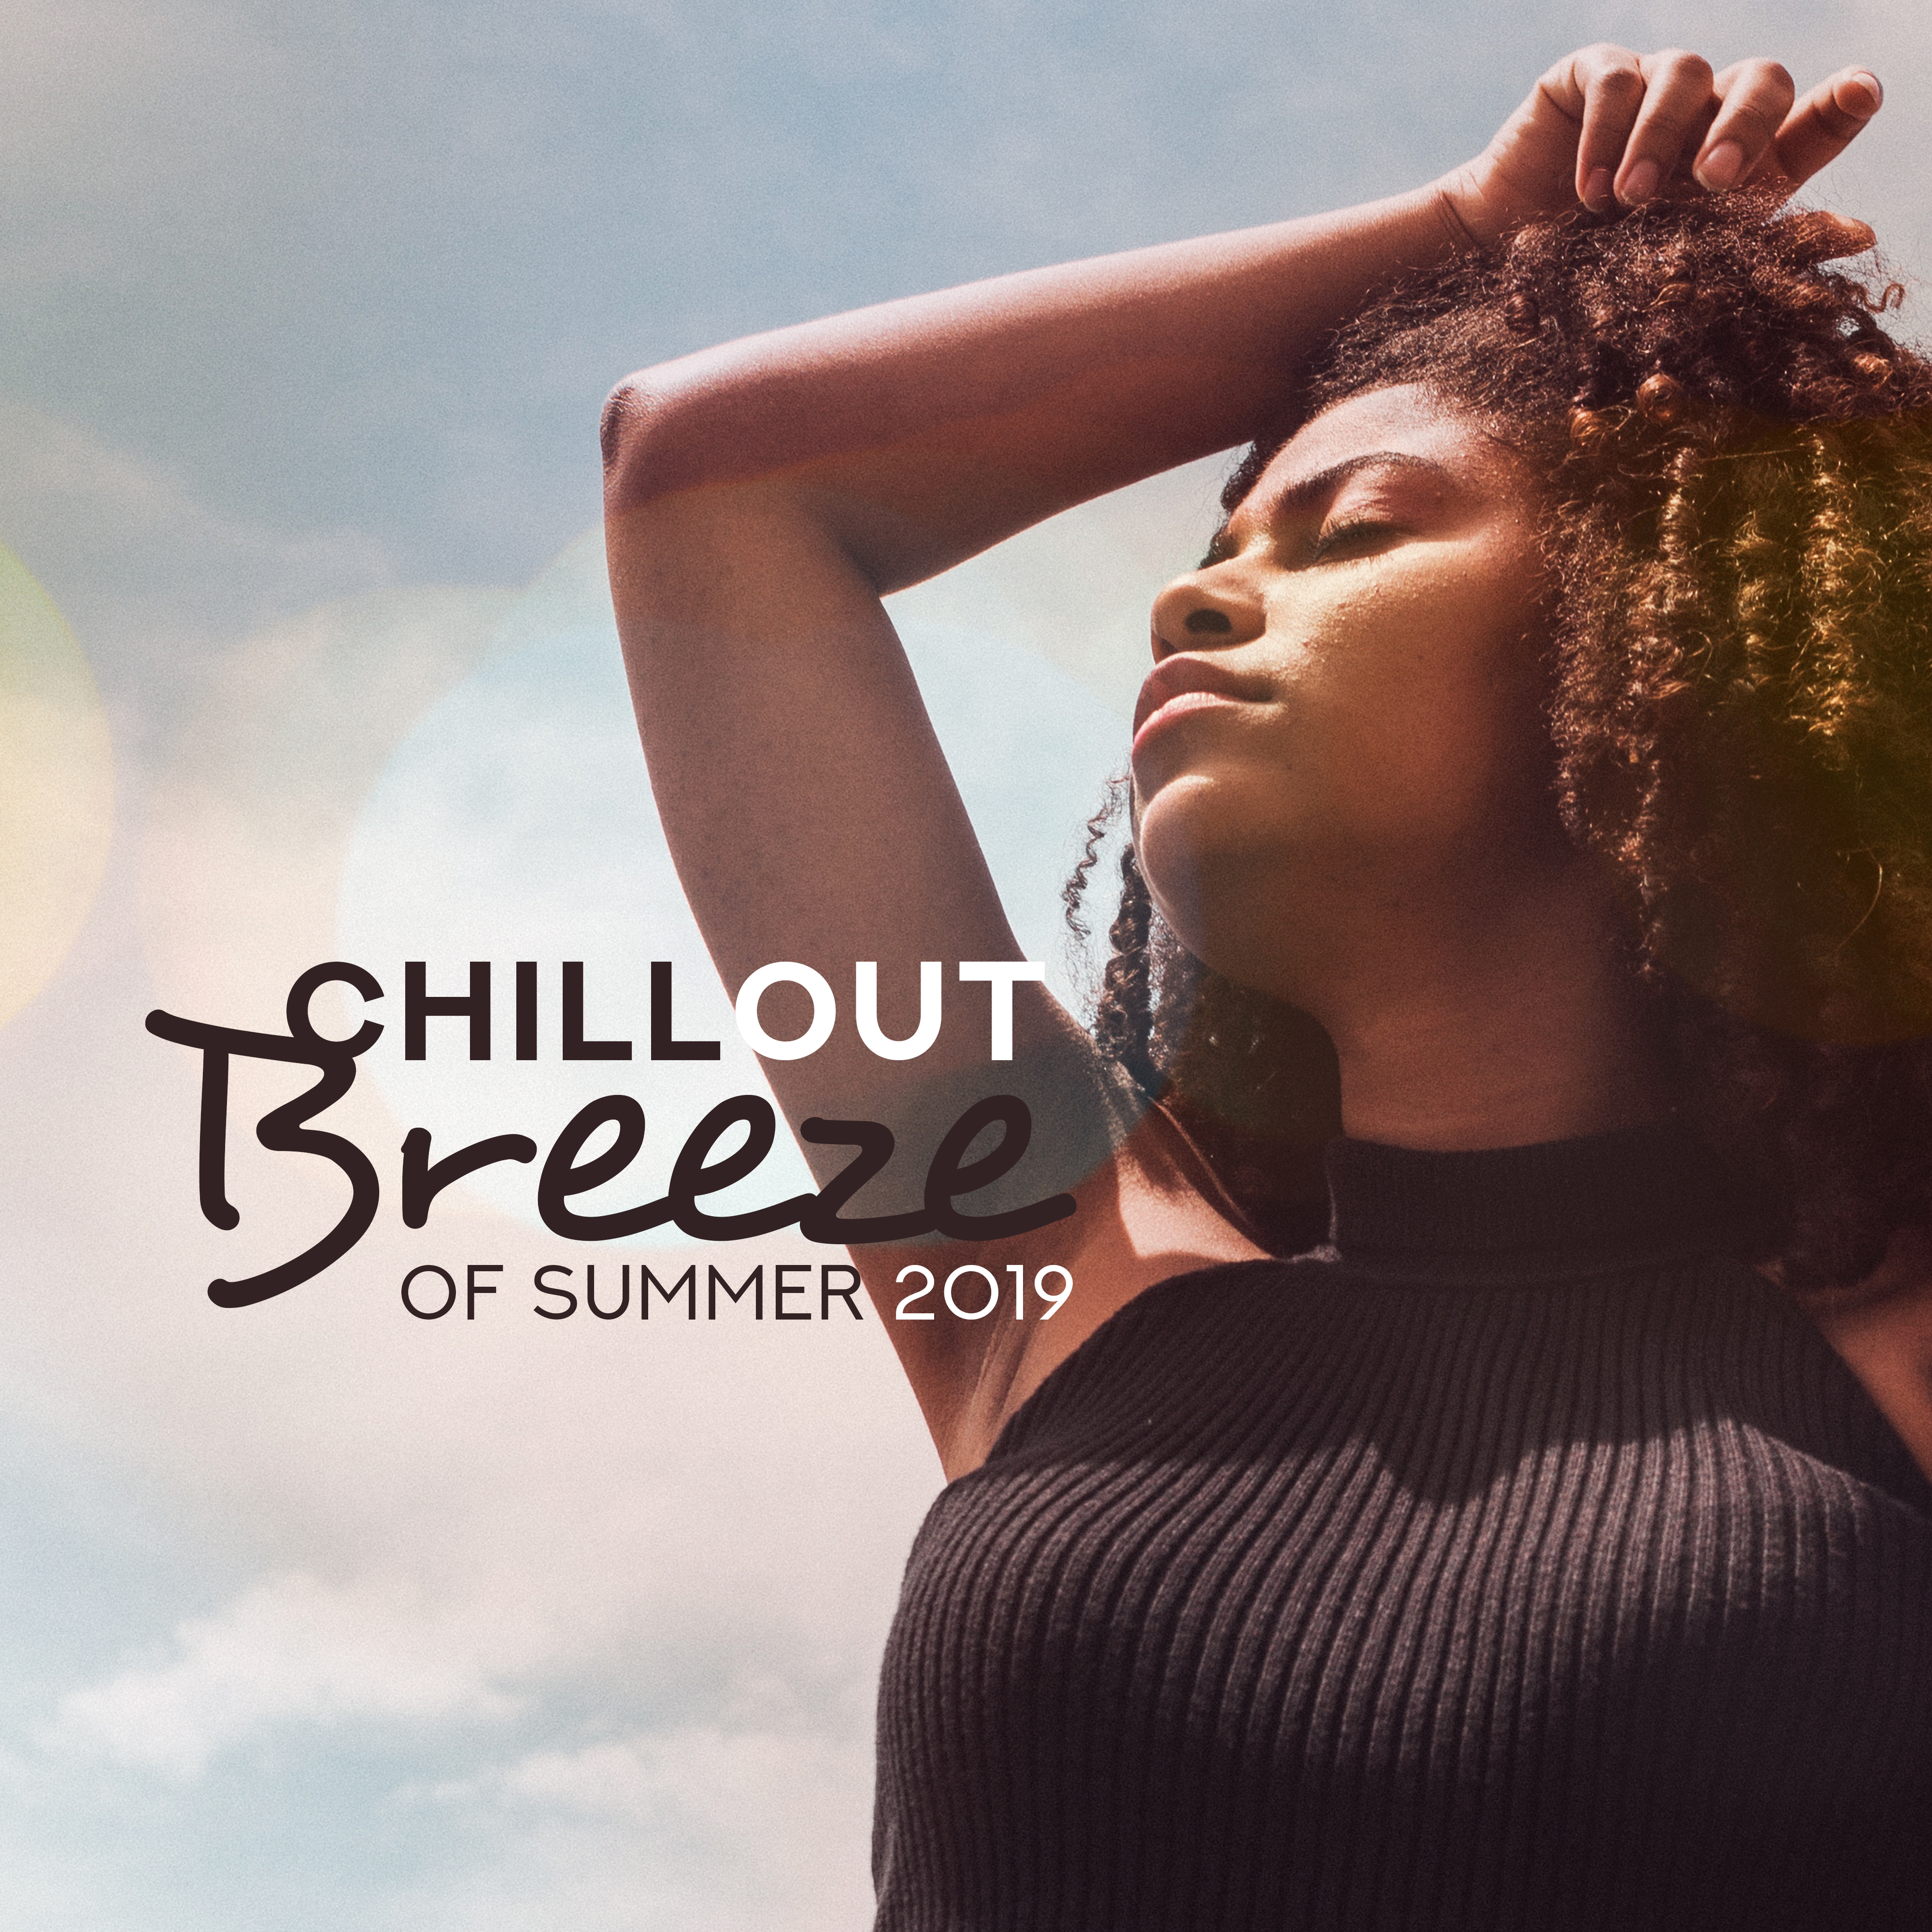 Chillout Breeze of Summer 2019